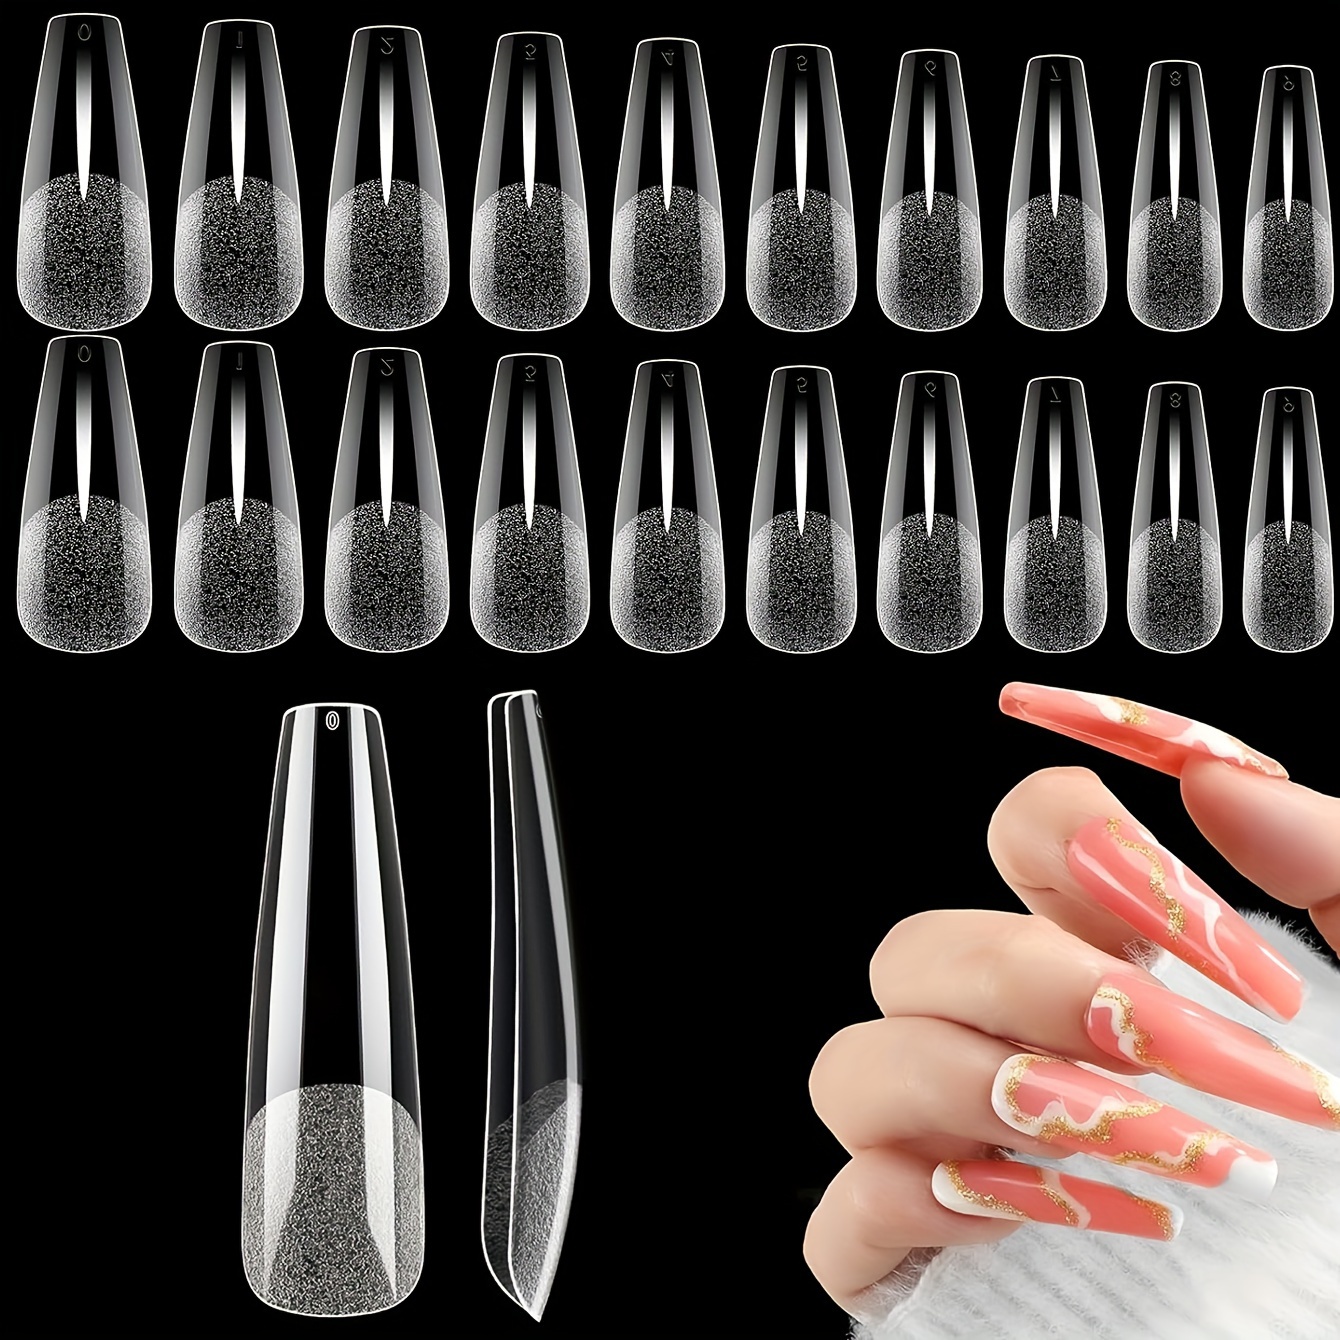 

120pcs Extra Long Coffin Nail Tips Xxl Soft Gel Pre-shaped Press-on Nails, No C-curve Full Cover Ballet Dancer Nail Tips, Transparent Fake Nails, Acrylic Soak-off For Diy Salon, 12 Sizes